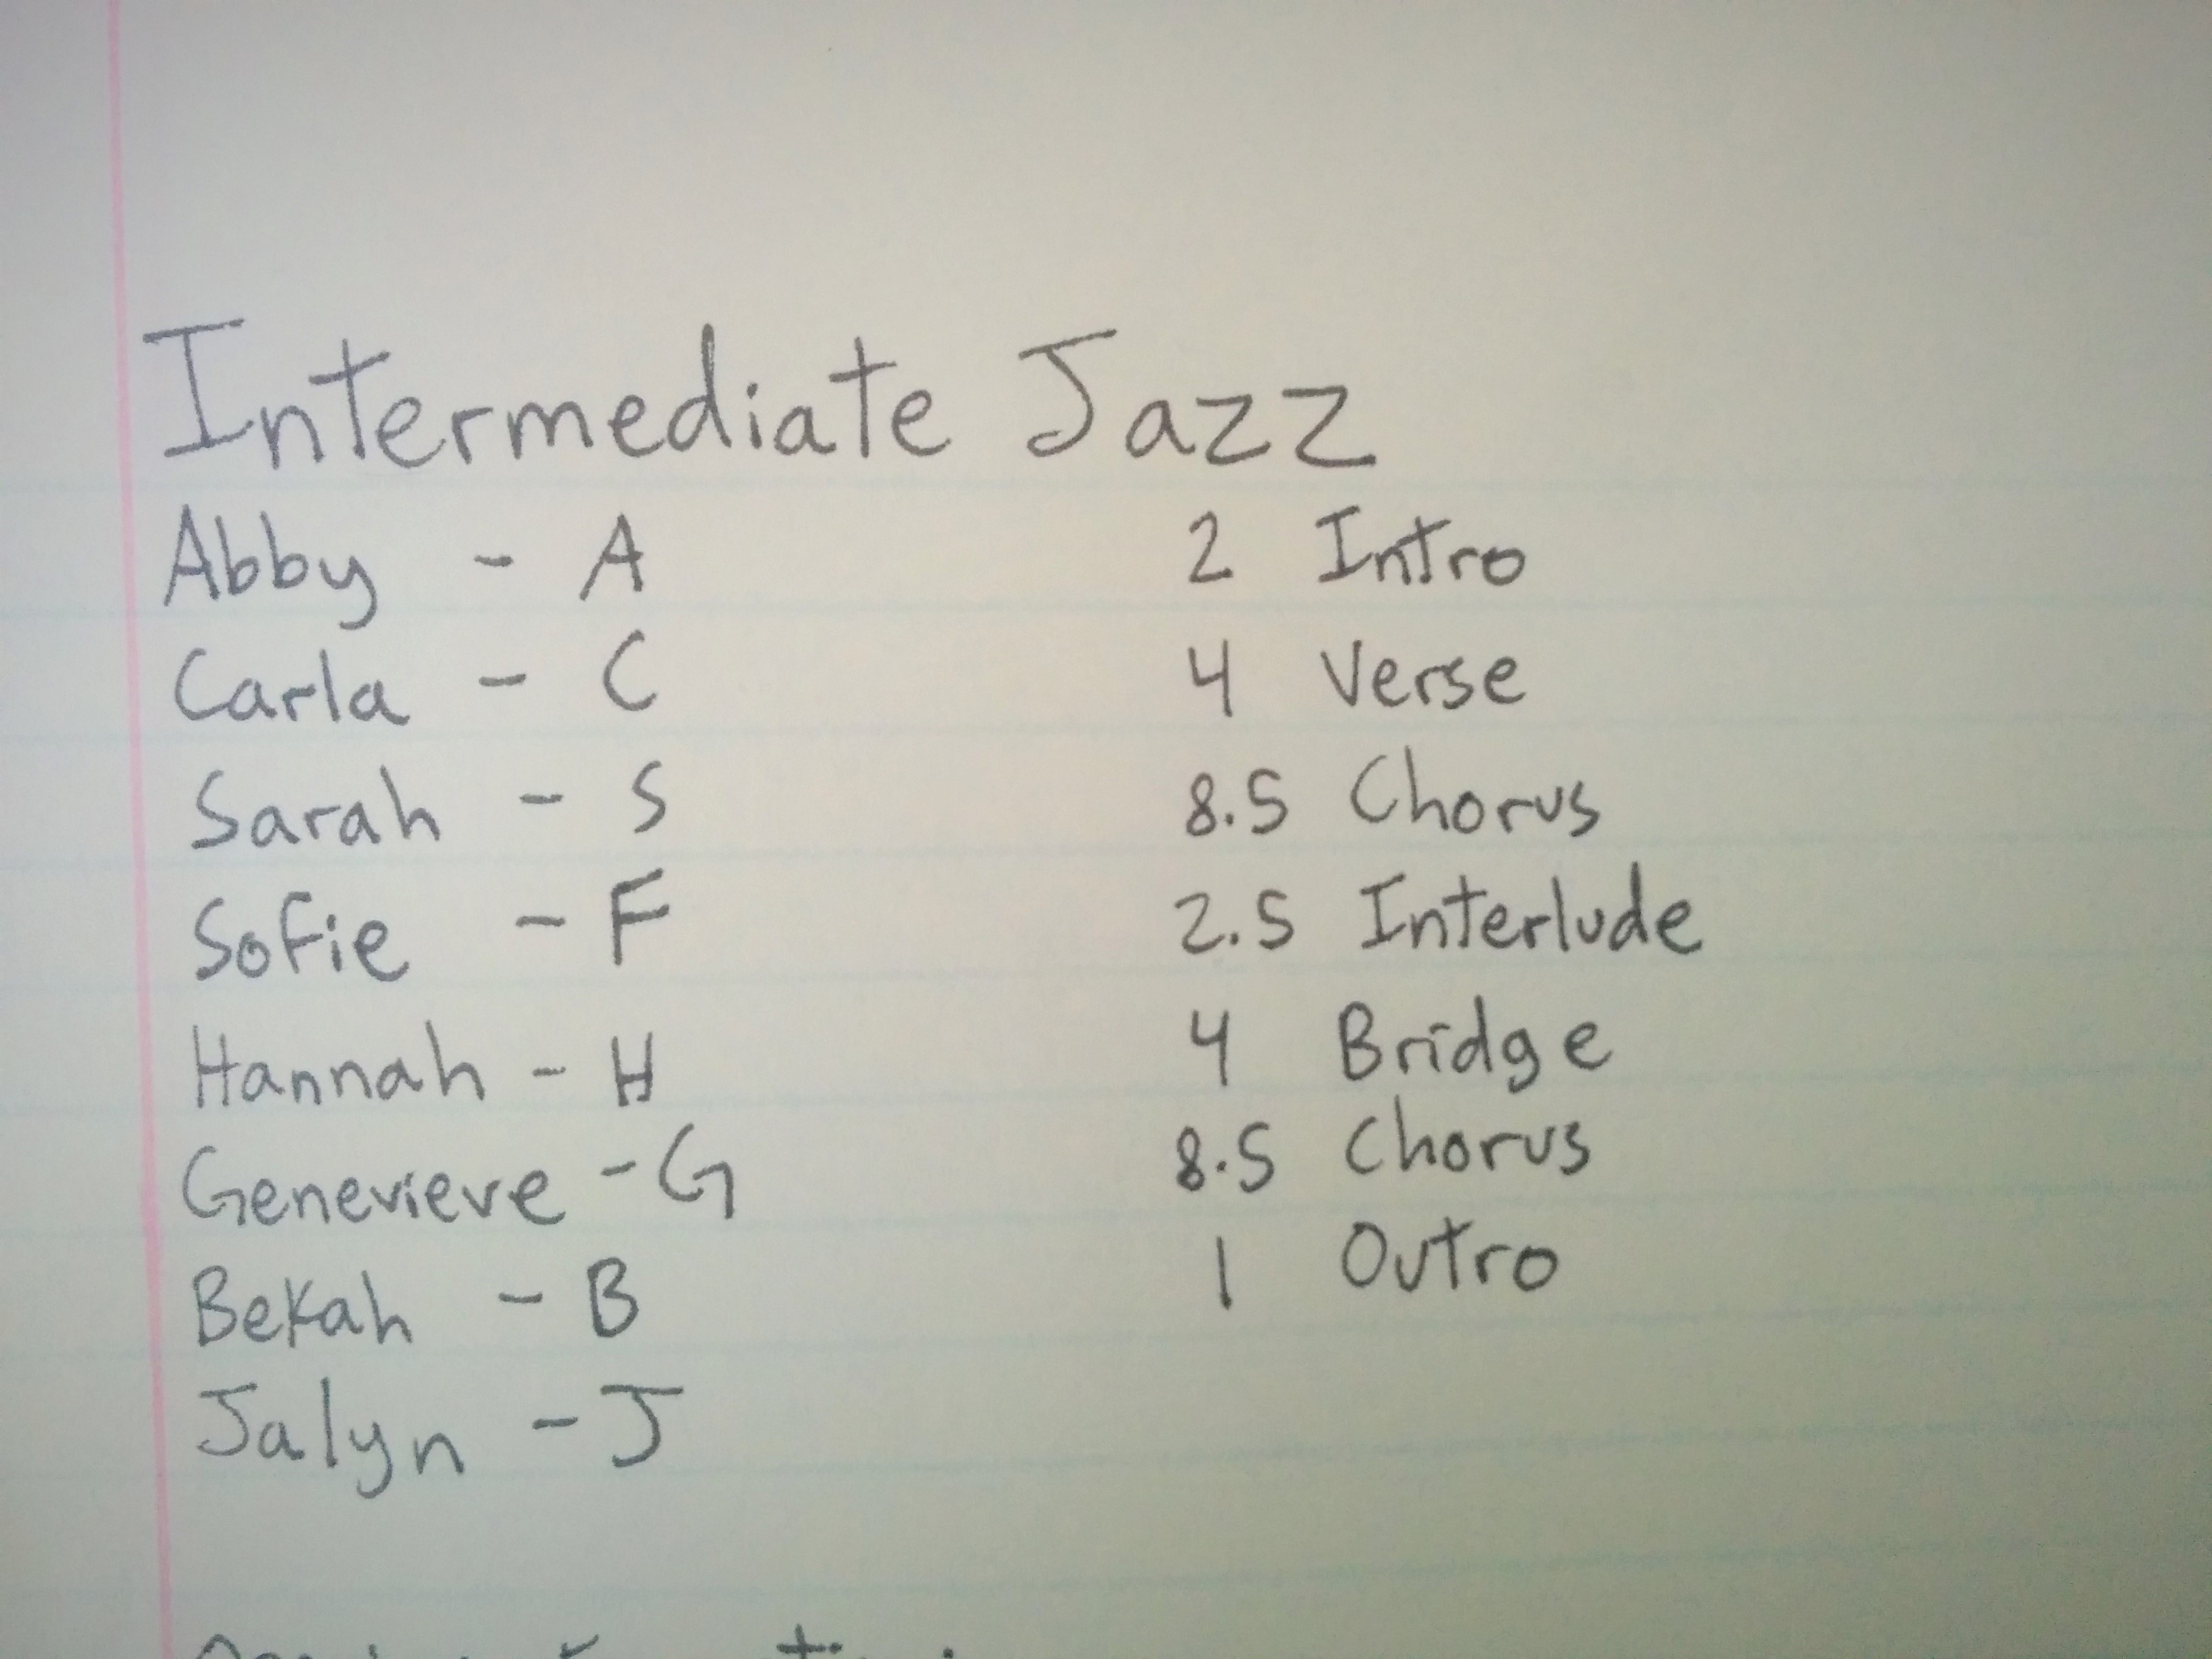 Paper with writing. Includes names with their single-letter abbreviations as well as a map of the music.